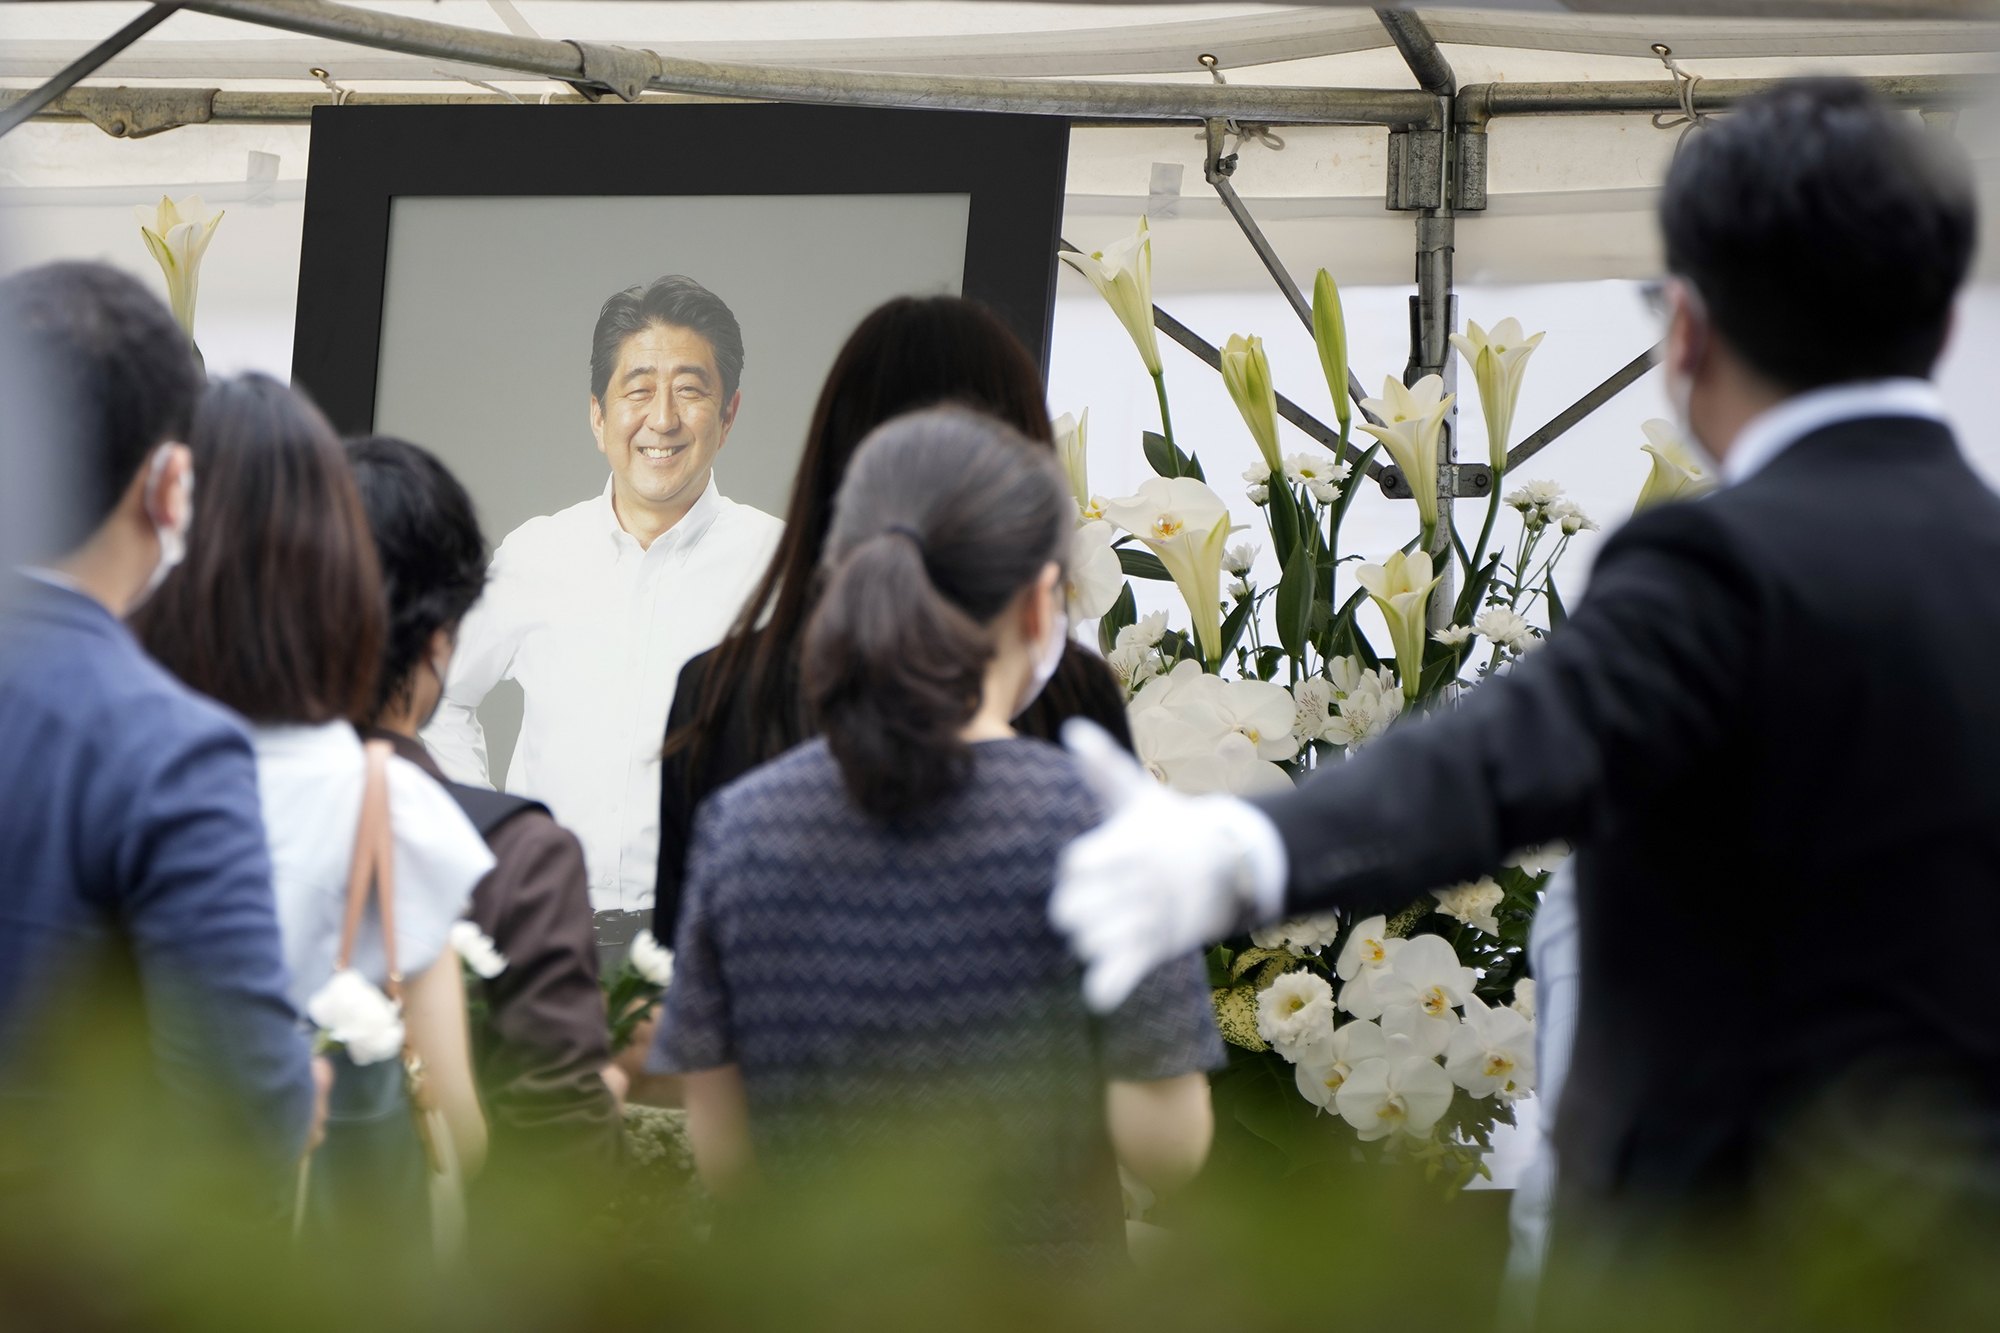 People queue to offer flowers and prayers for former Prime Minister Shinzo Abe, at Zojoji temple prior to his funeral on July 12, 2022, in Tokyo.